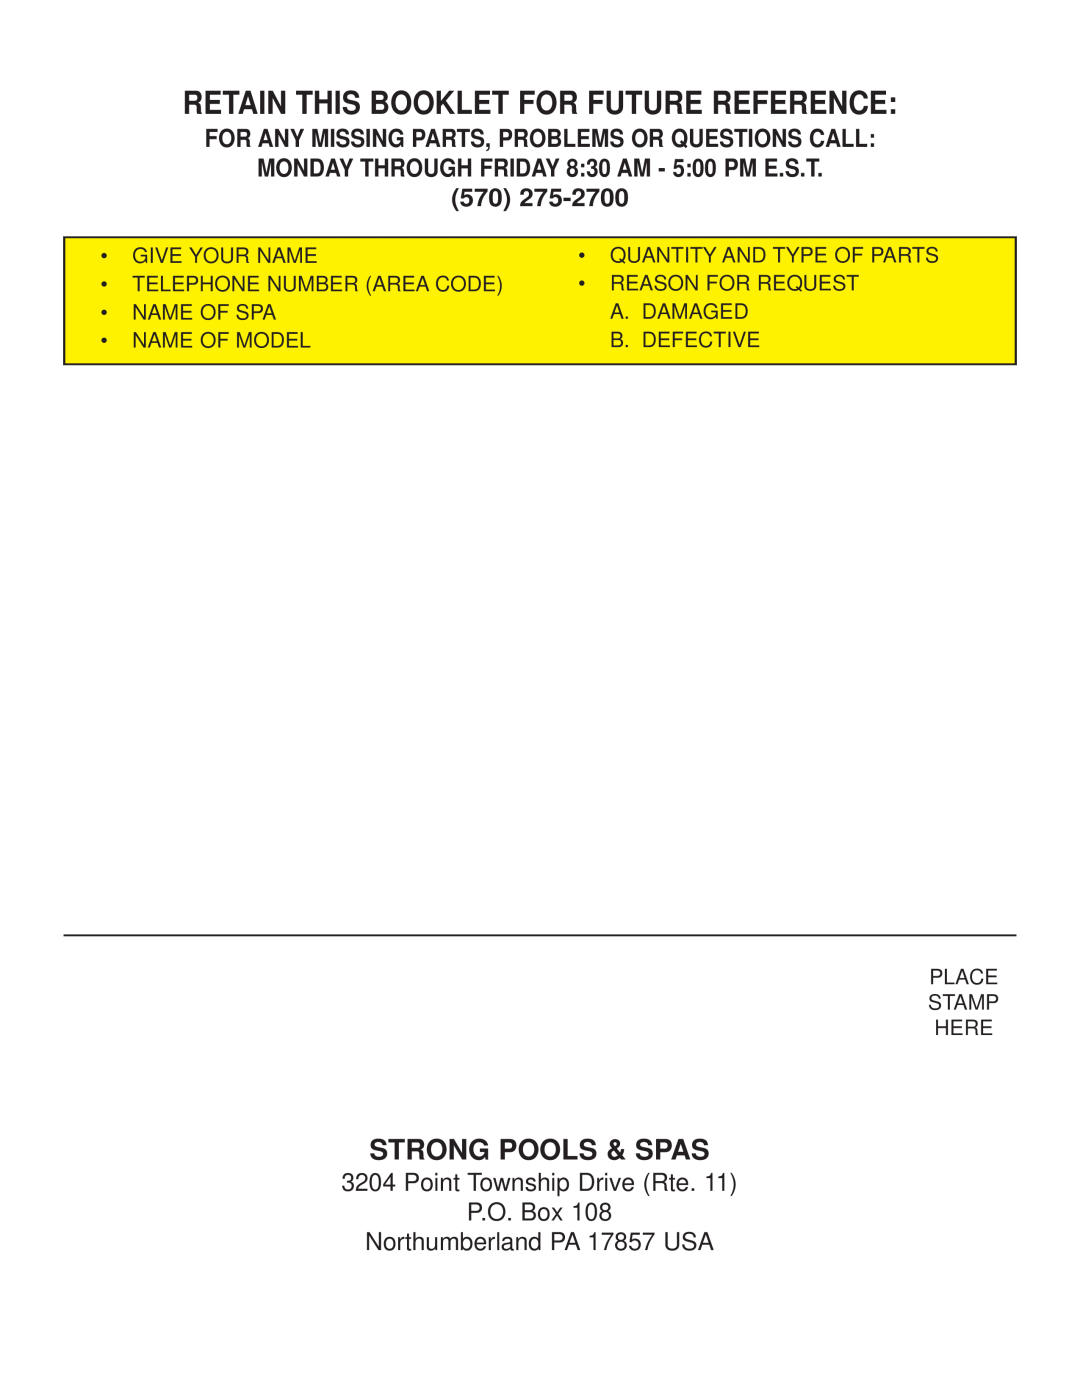 Strong Pools and Spas Vienna Retain This Booklet For Future Reference, For Any Missing Parts, Problems Or Questions Call 